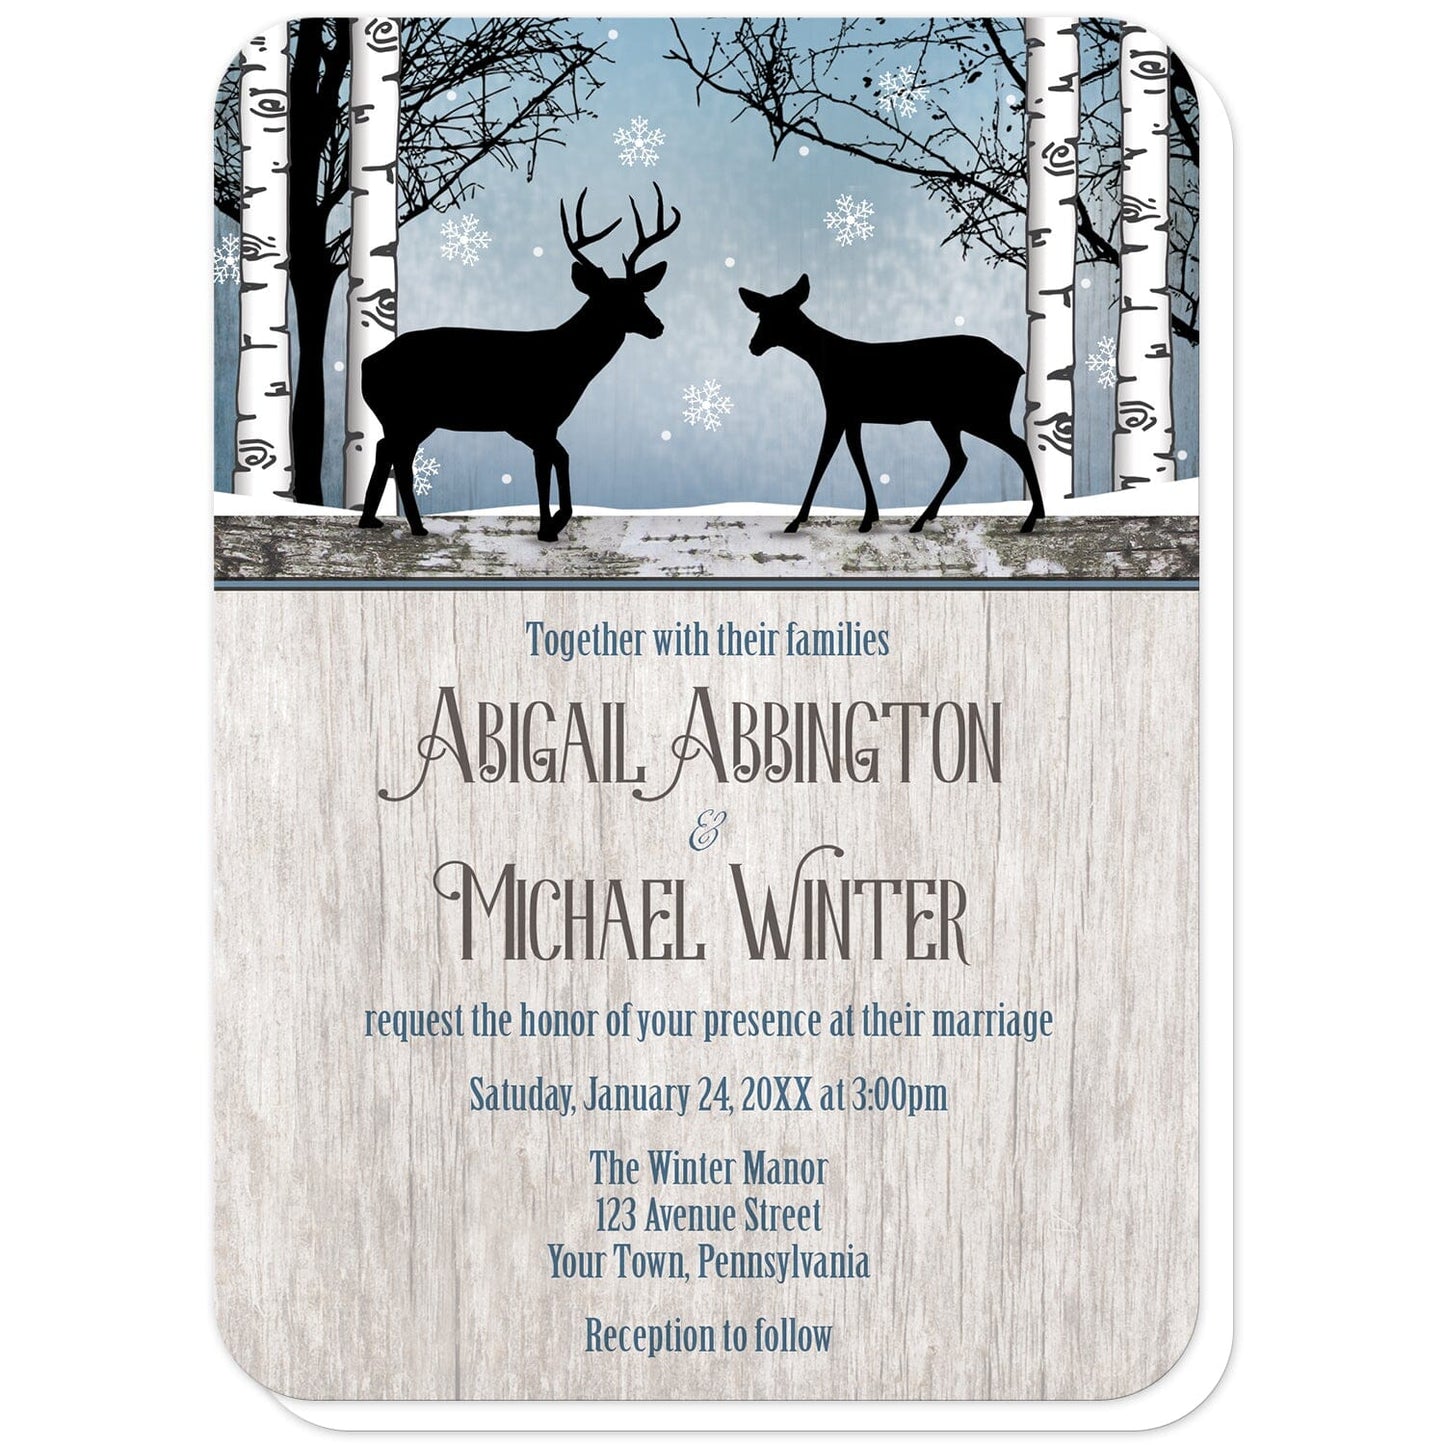 Rustic Blue Winter Deer Wedding Invitations (with rounded corners) at Artistically Invited. Rustic blue winter deer wedding invitations with two silhouettes of deer surrounded by white birch trees over a snowy blue background with snowflakes. One silhouette is of a buck deer with antlers while the other is a gentle doe, meeting in the middle. Your personalized marriage celebration details are custom printed in blue and brown over a light country wood background.